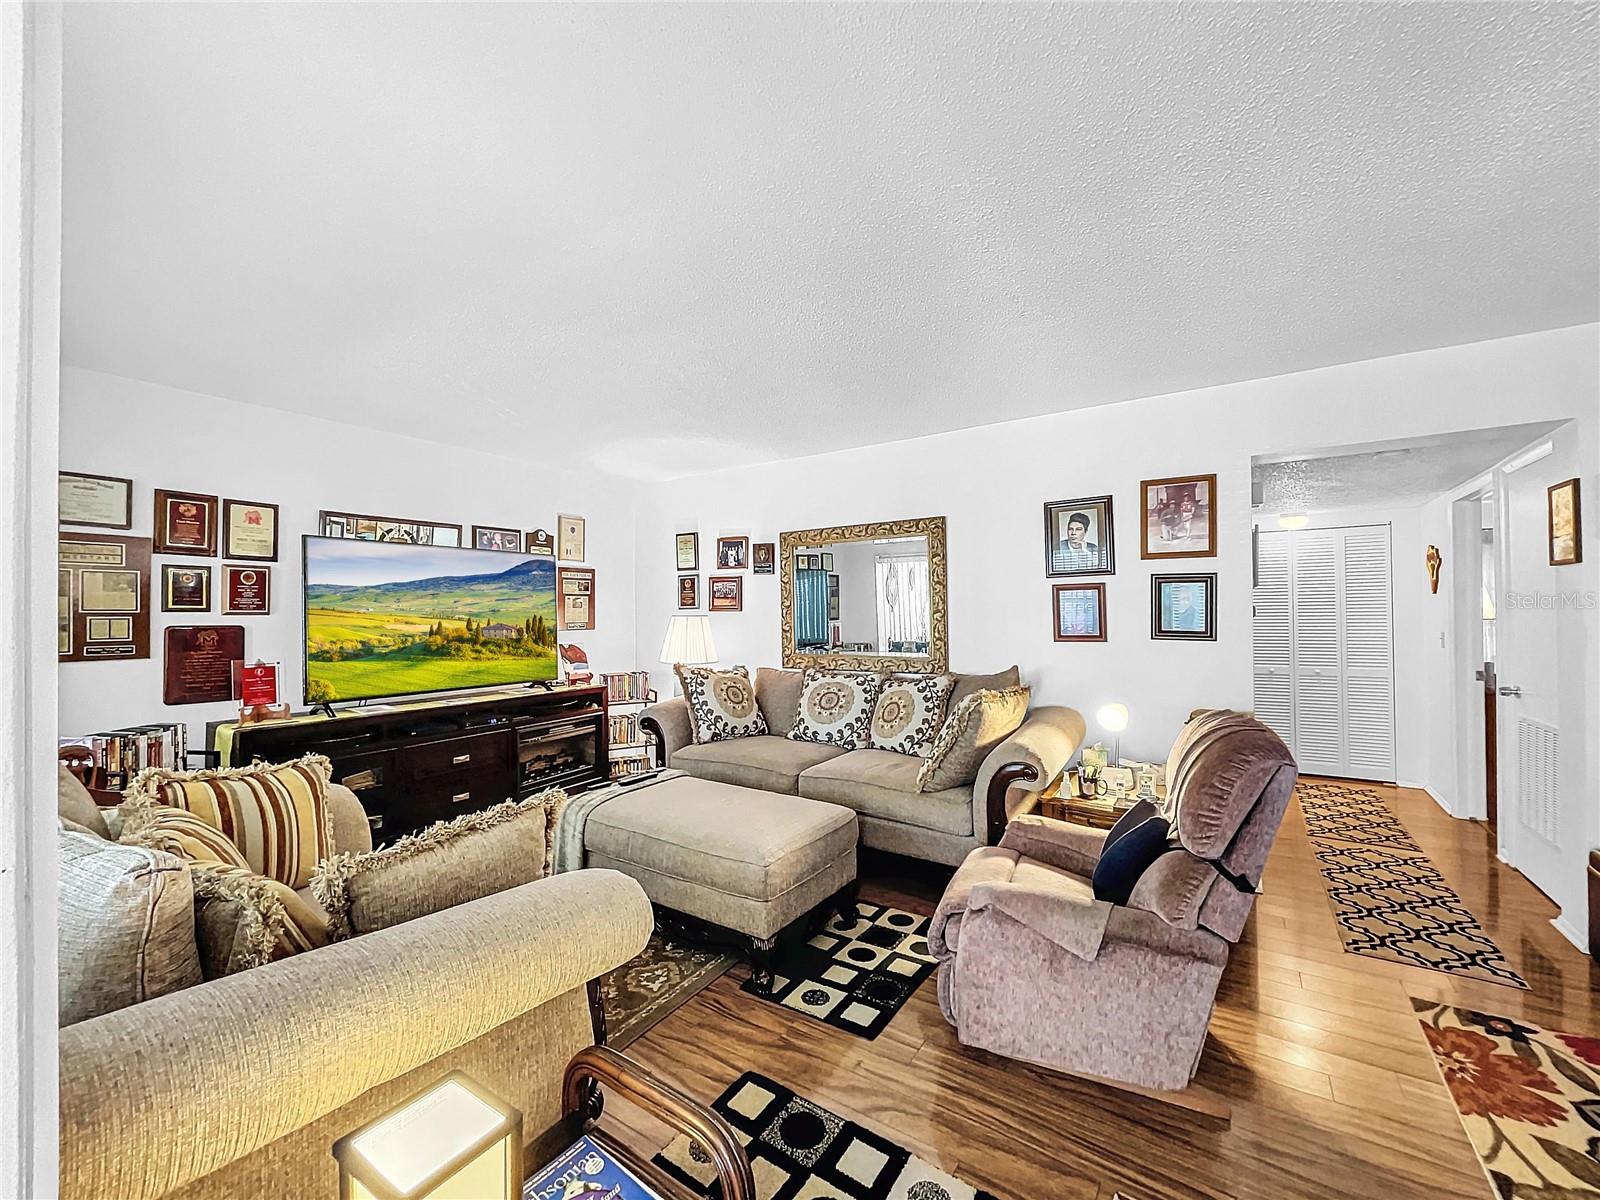 Living room offers ample space for your decor.